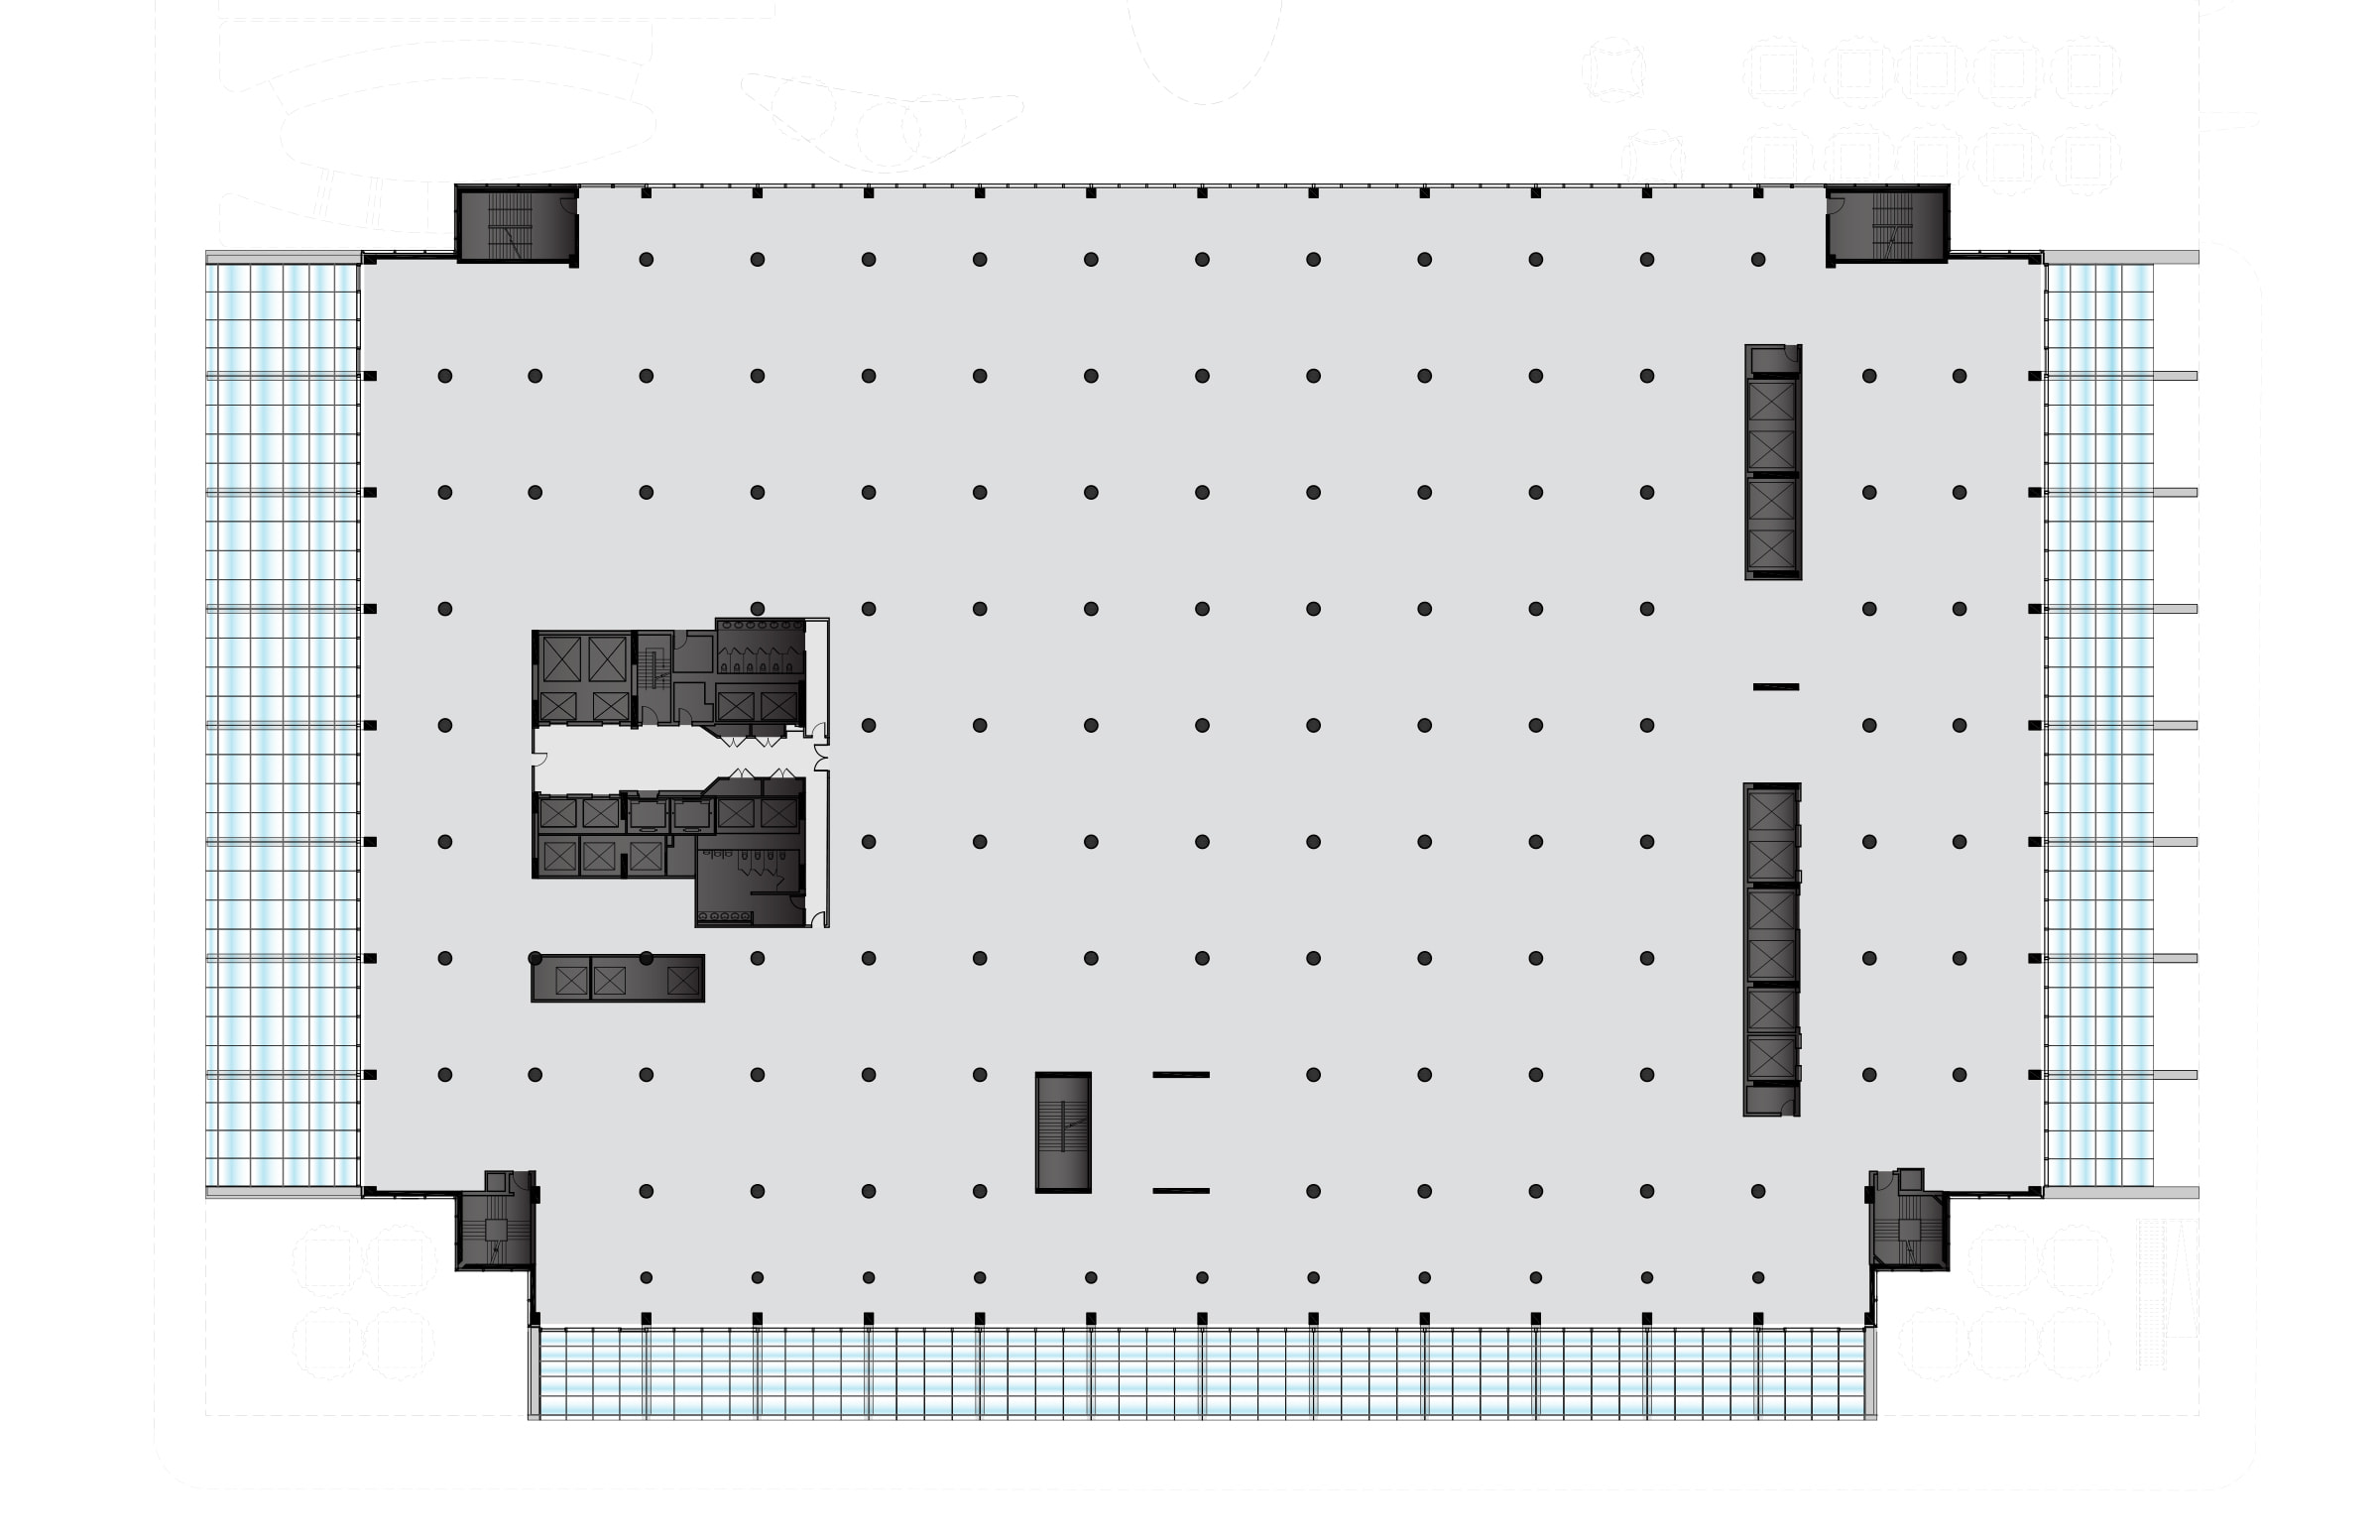 An image of the Level 8 floor plan.